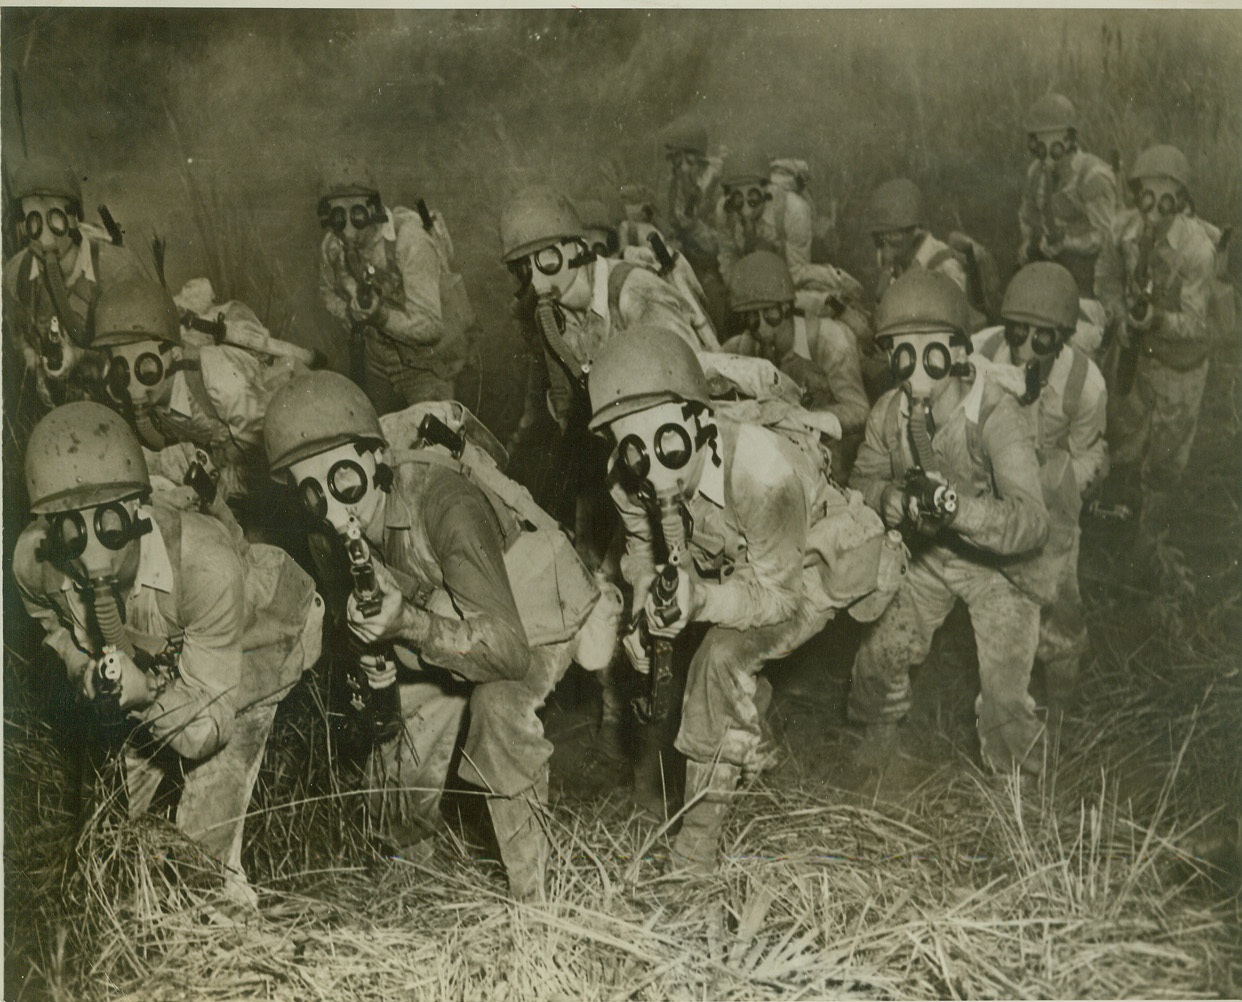 “Bushmasters” on Maneuvers, 9/29/1942. CARIBBEAN DEFENSE AREA – Members of a crack U.S. Army jungle-fighting unit, the “Bushmasters” as they maneuver through a simulated gas attack. These men, highly-trained and tough, are the spearhead of the attack forces under Lt. Gen. Frank M. Andrews, Chief of the Caribbean Defense Area. Credit: (U.S. Army Photo from ACME);